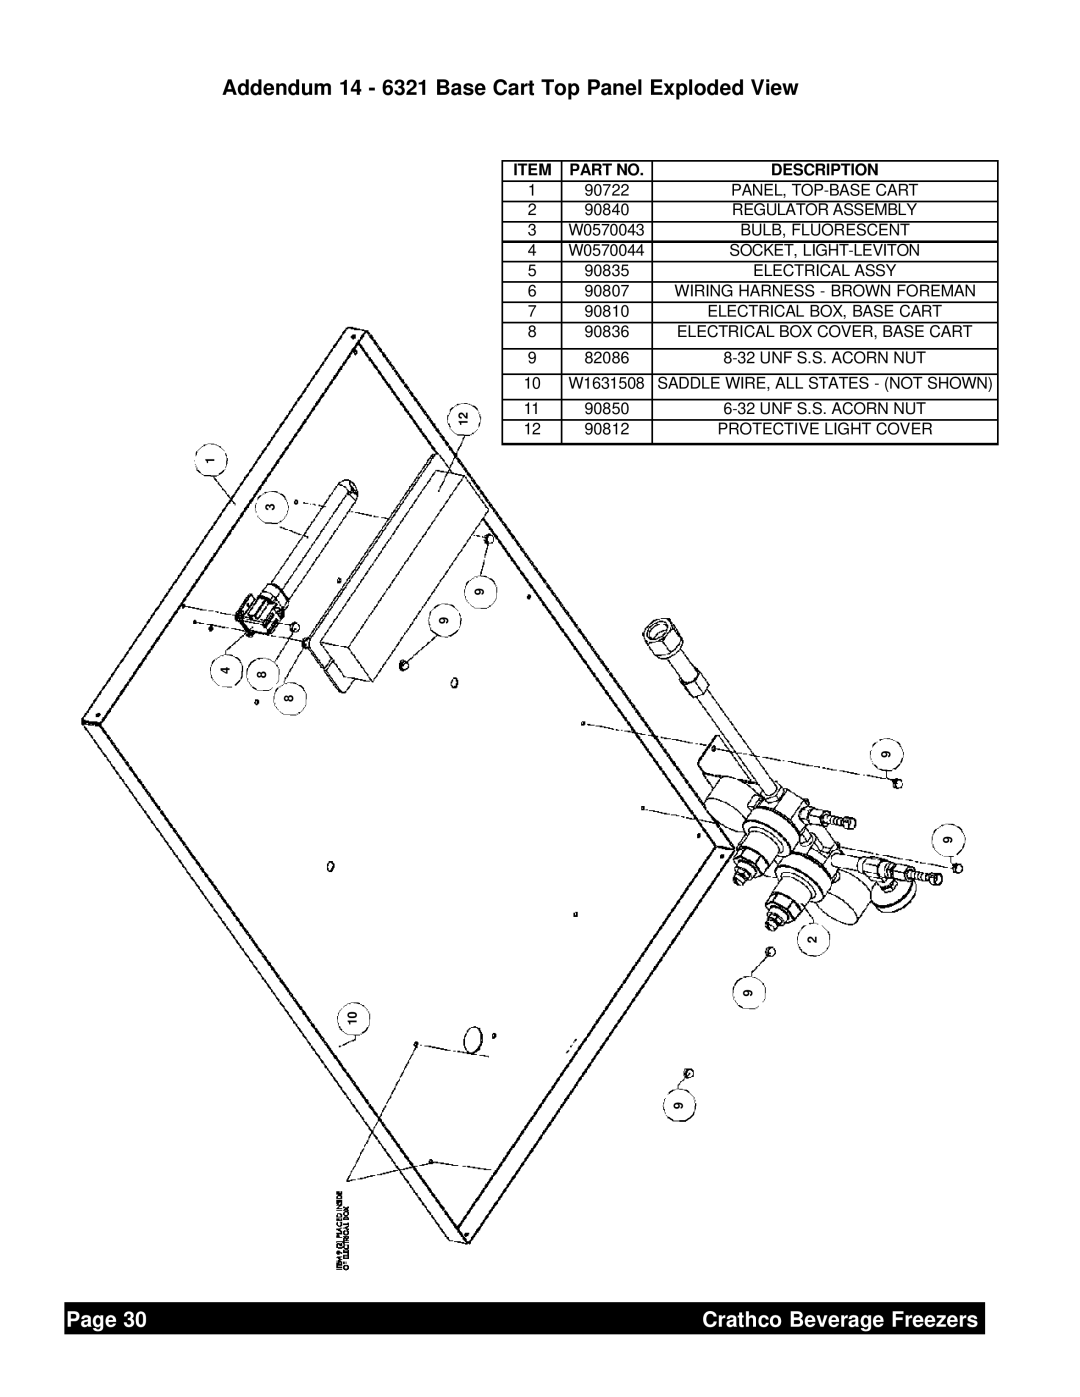 Grindmaster 6321L service manual Addendum 14 - 6321 Base Cart Top Panel Exploded View, Page, Crathco Beverage Freezers 